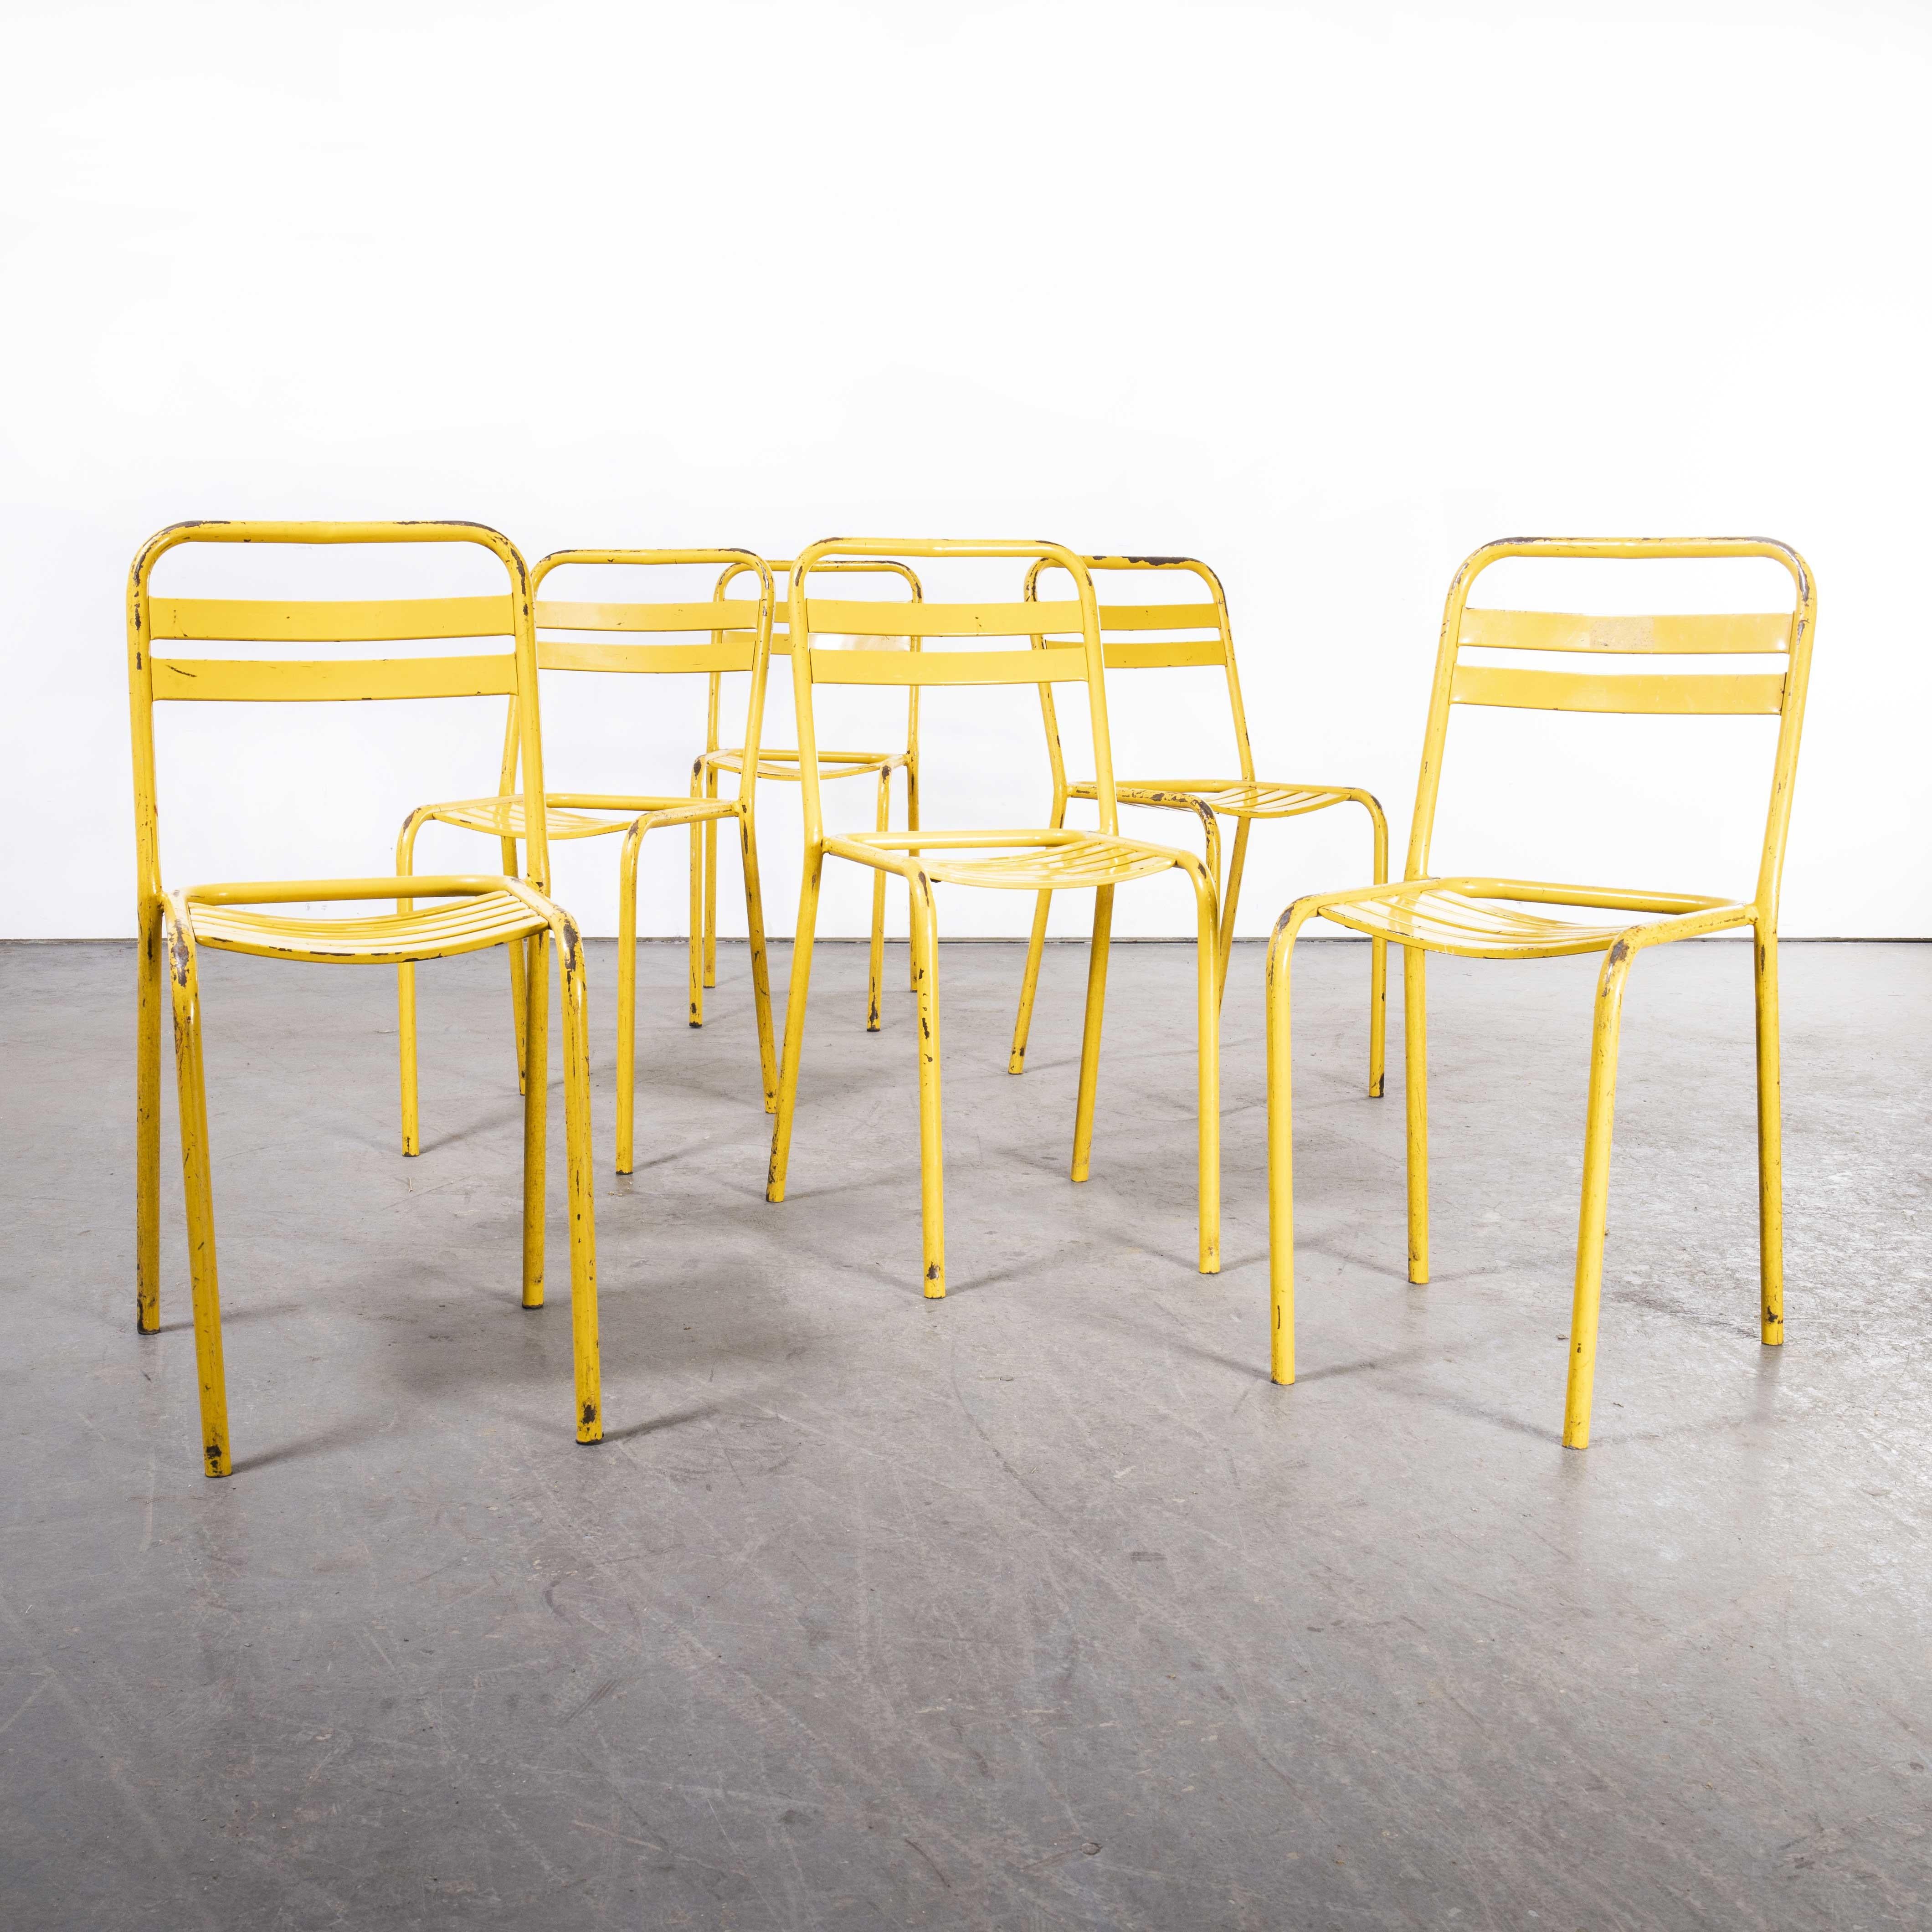 1950’s Original yellow French Tolix T2 metal outdoor dining chairs – set of six
1950’s Original yellow French Tolix T2 metal Caf? dining chairs – set Of six. is one of our all time favourite companies. In 1907 Frenchman Xavier Pauchard discovered